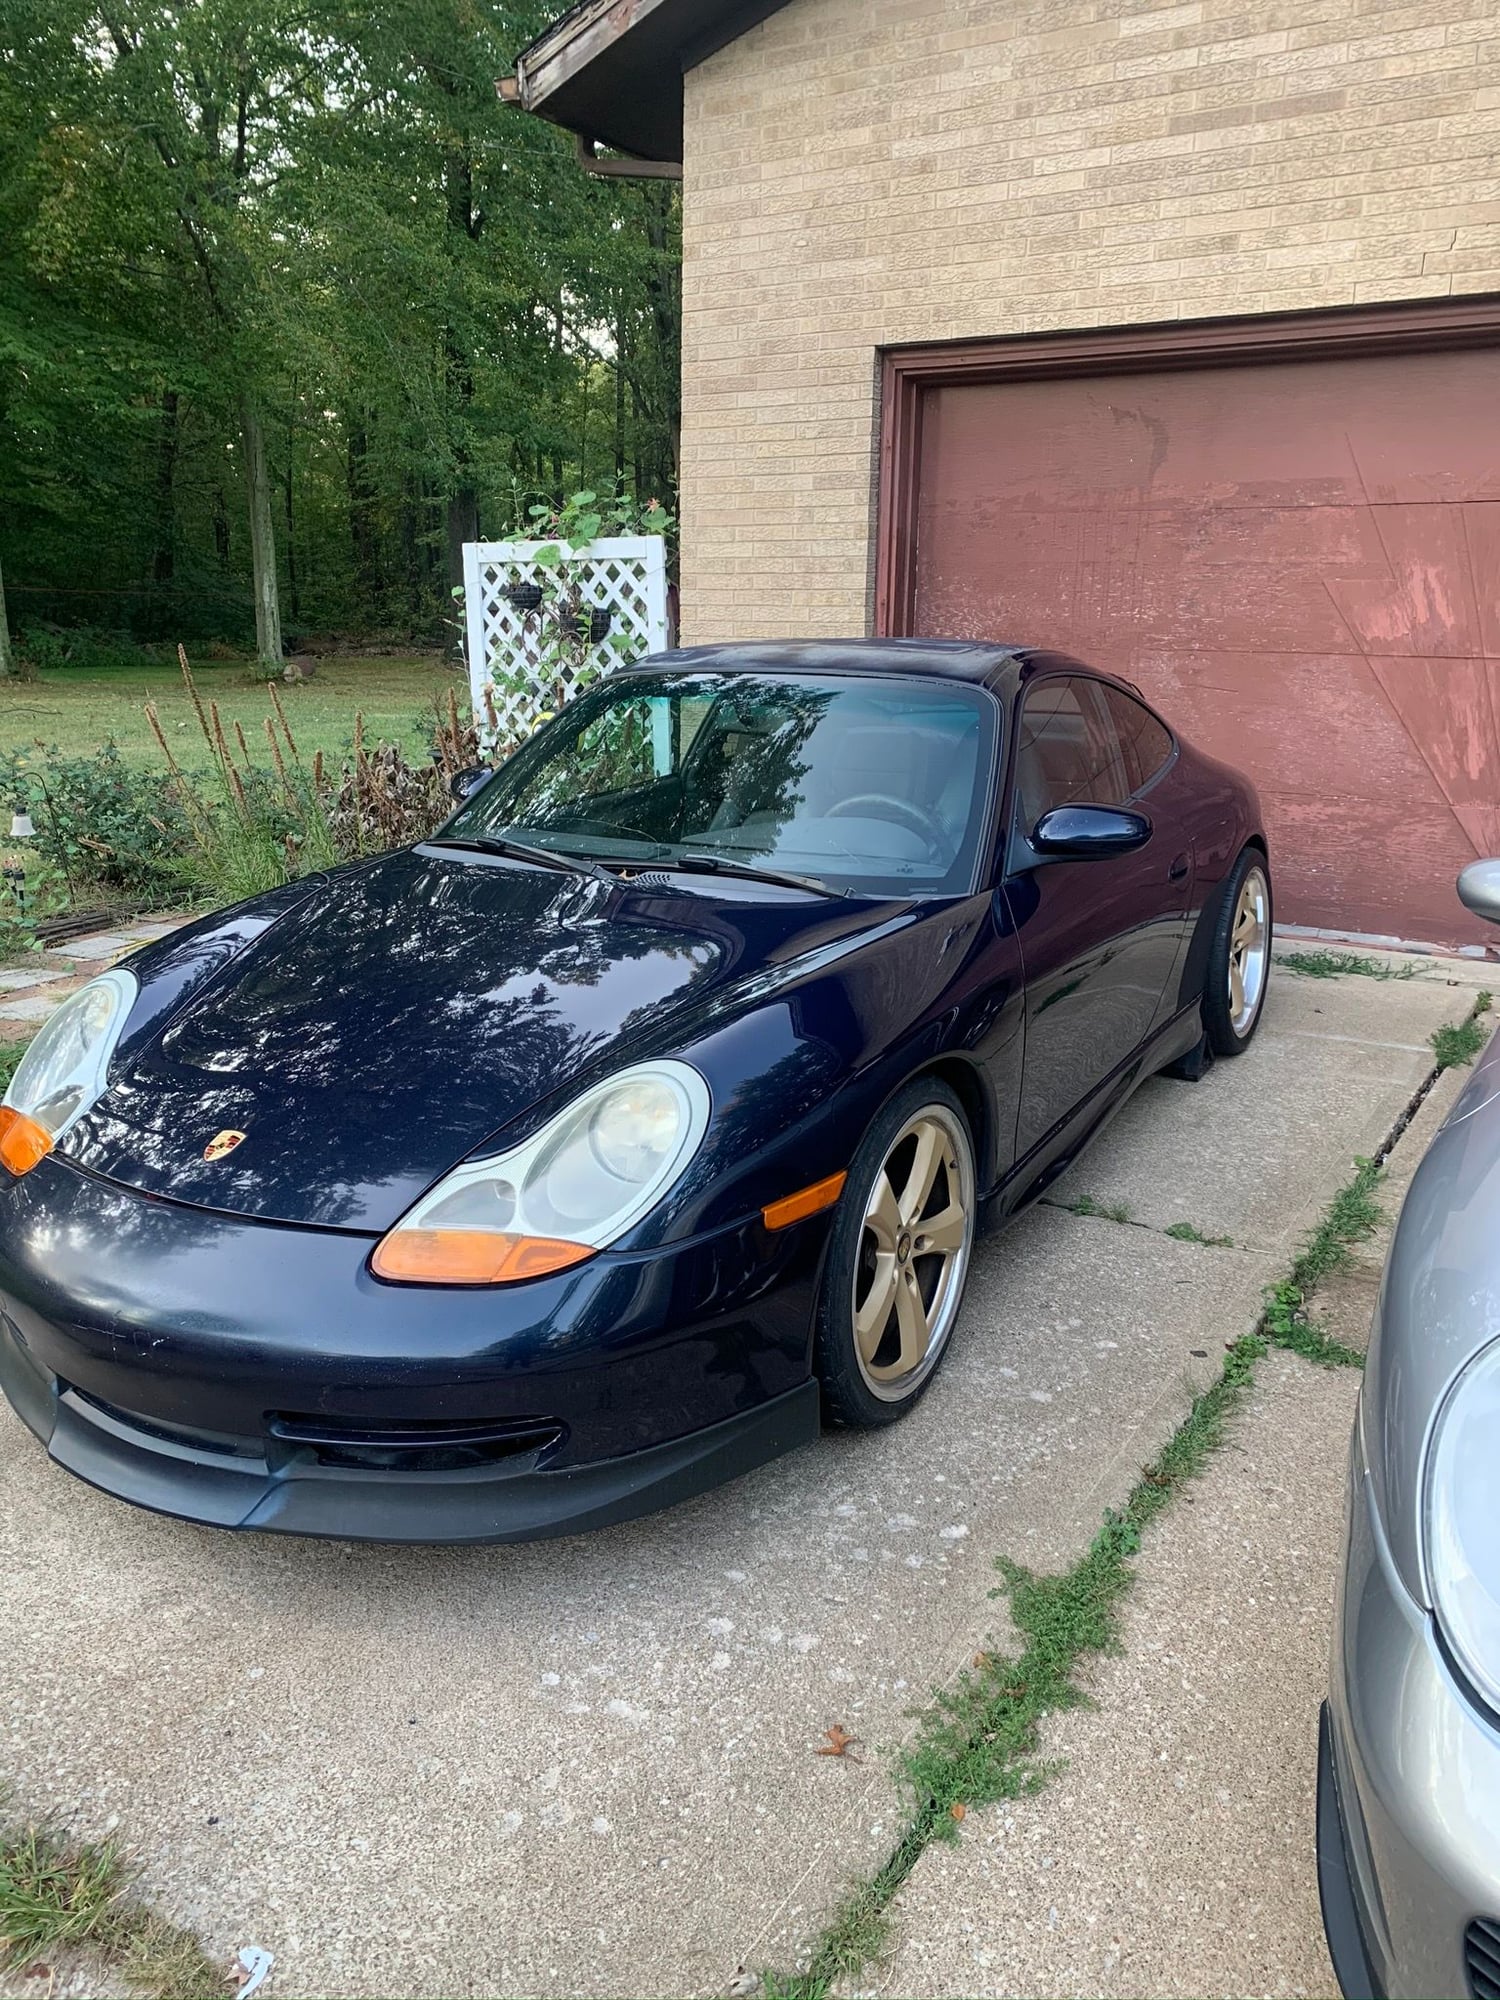 1999 Porsche 911 - 996 c2 - Used - VIN WP0AA2990XS620876 - 6 cyl - 2WD - Manual - Coupe - Blue - North Canton, OH 44720, United States